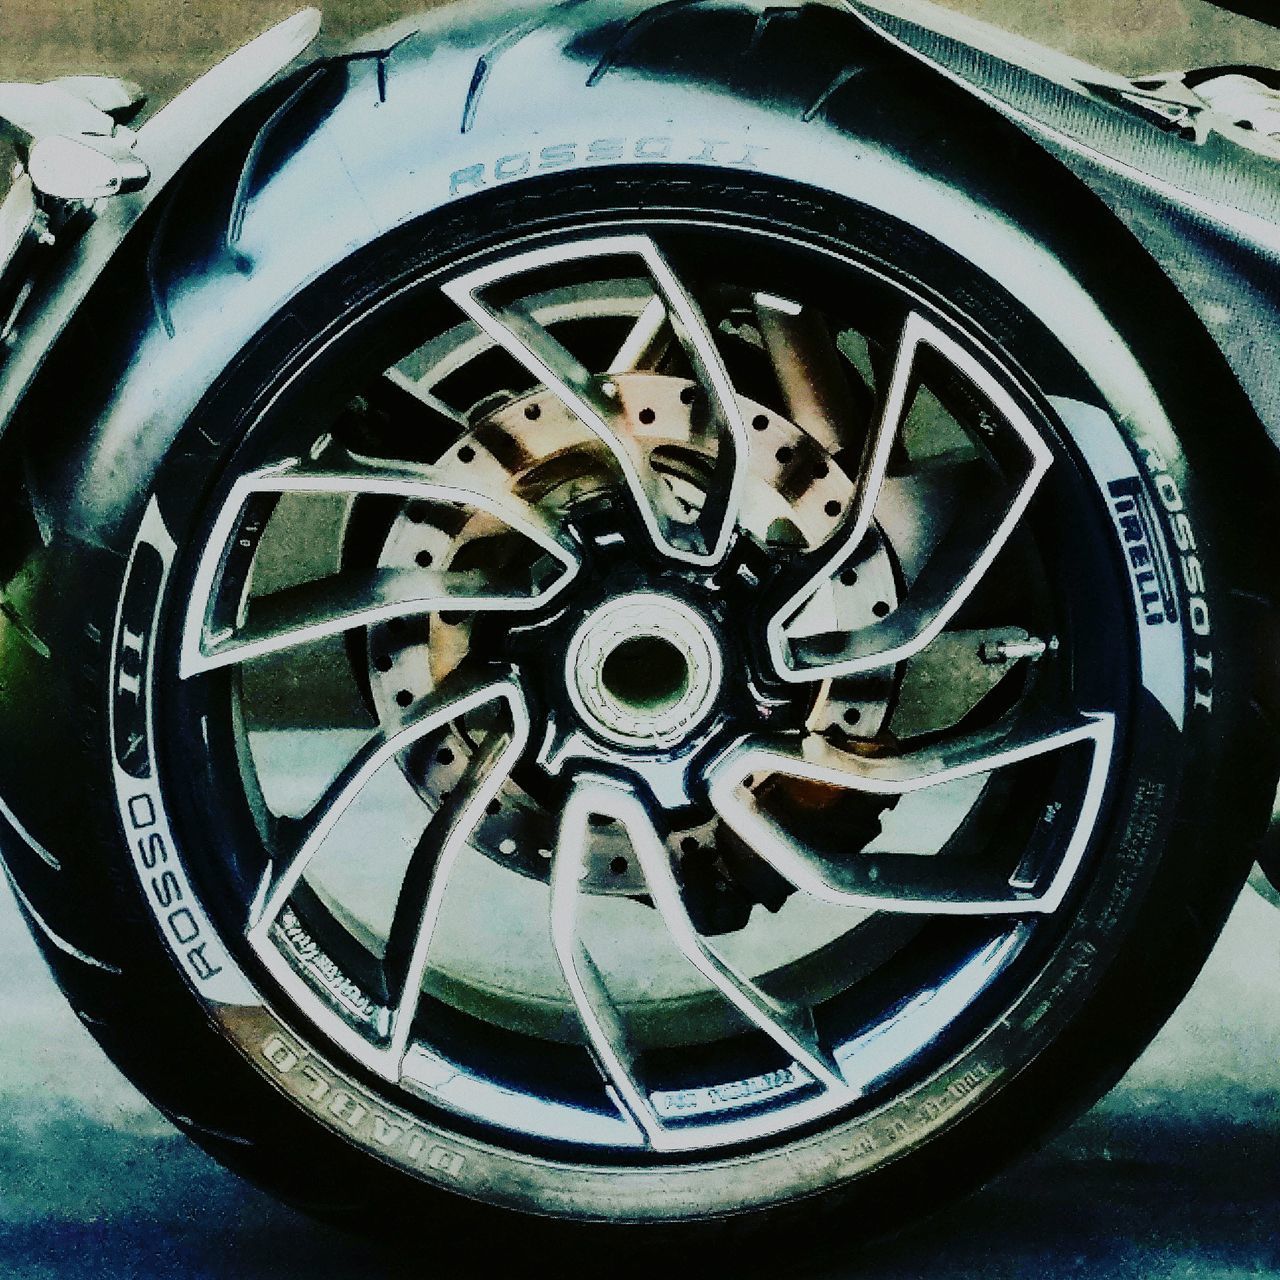 CLOSE-UP OF TIRE ON MOTORCYCLE